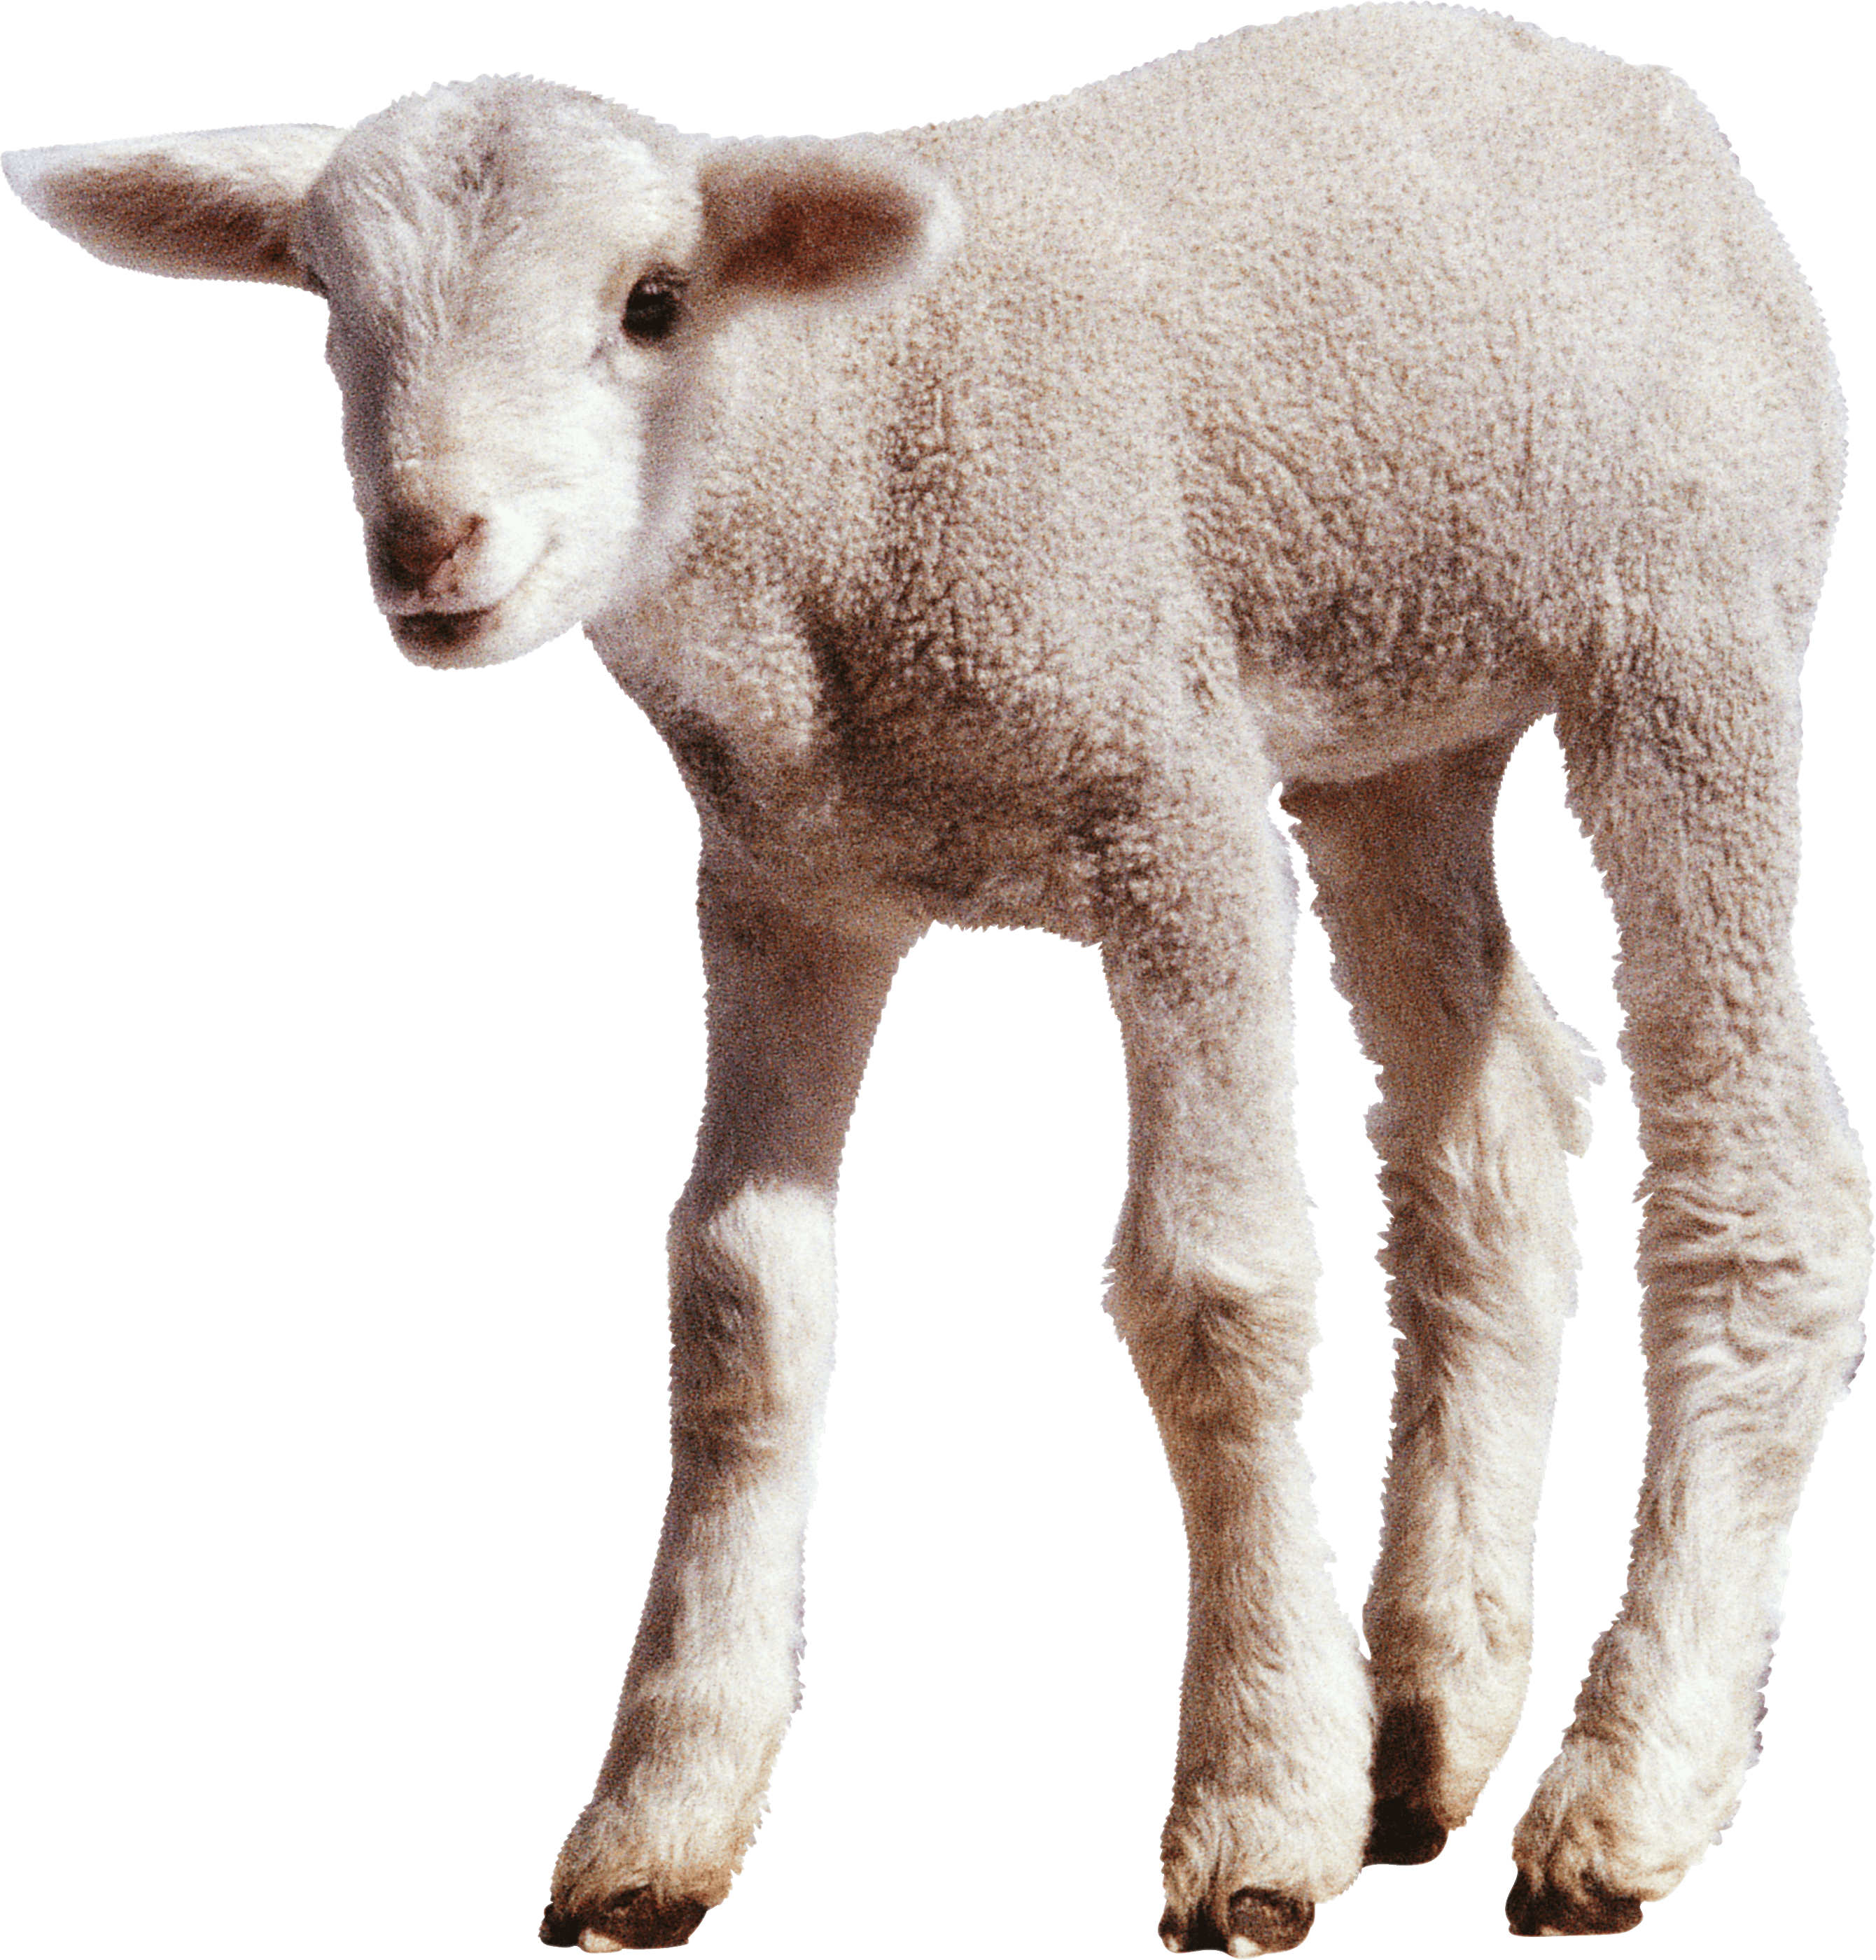 White Little Sheep Png Image PNG Image